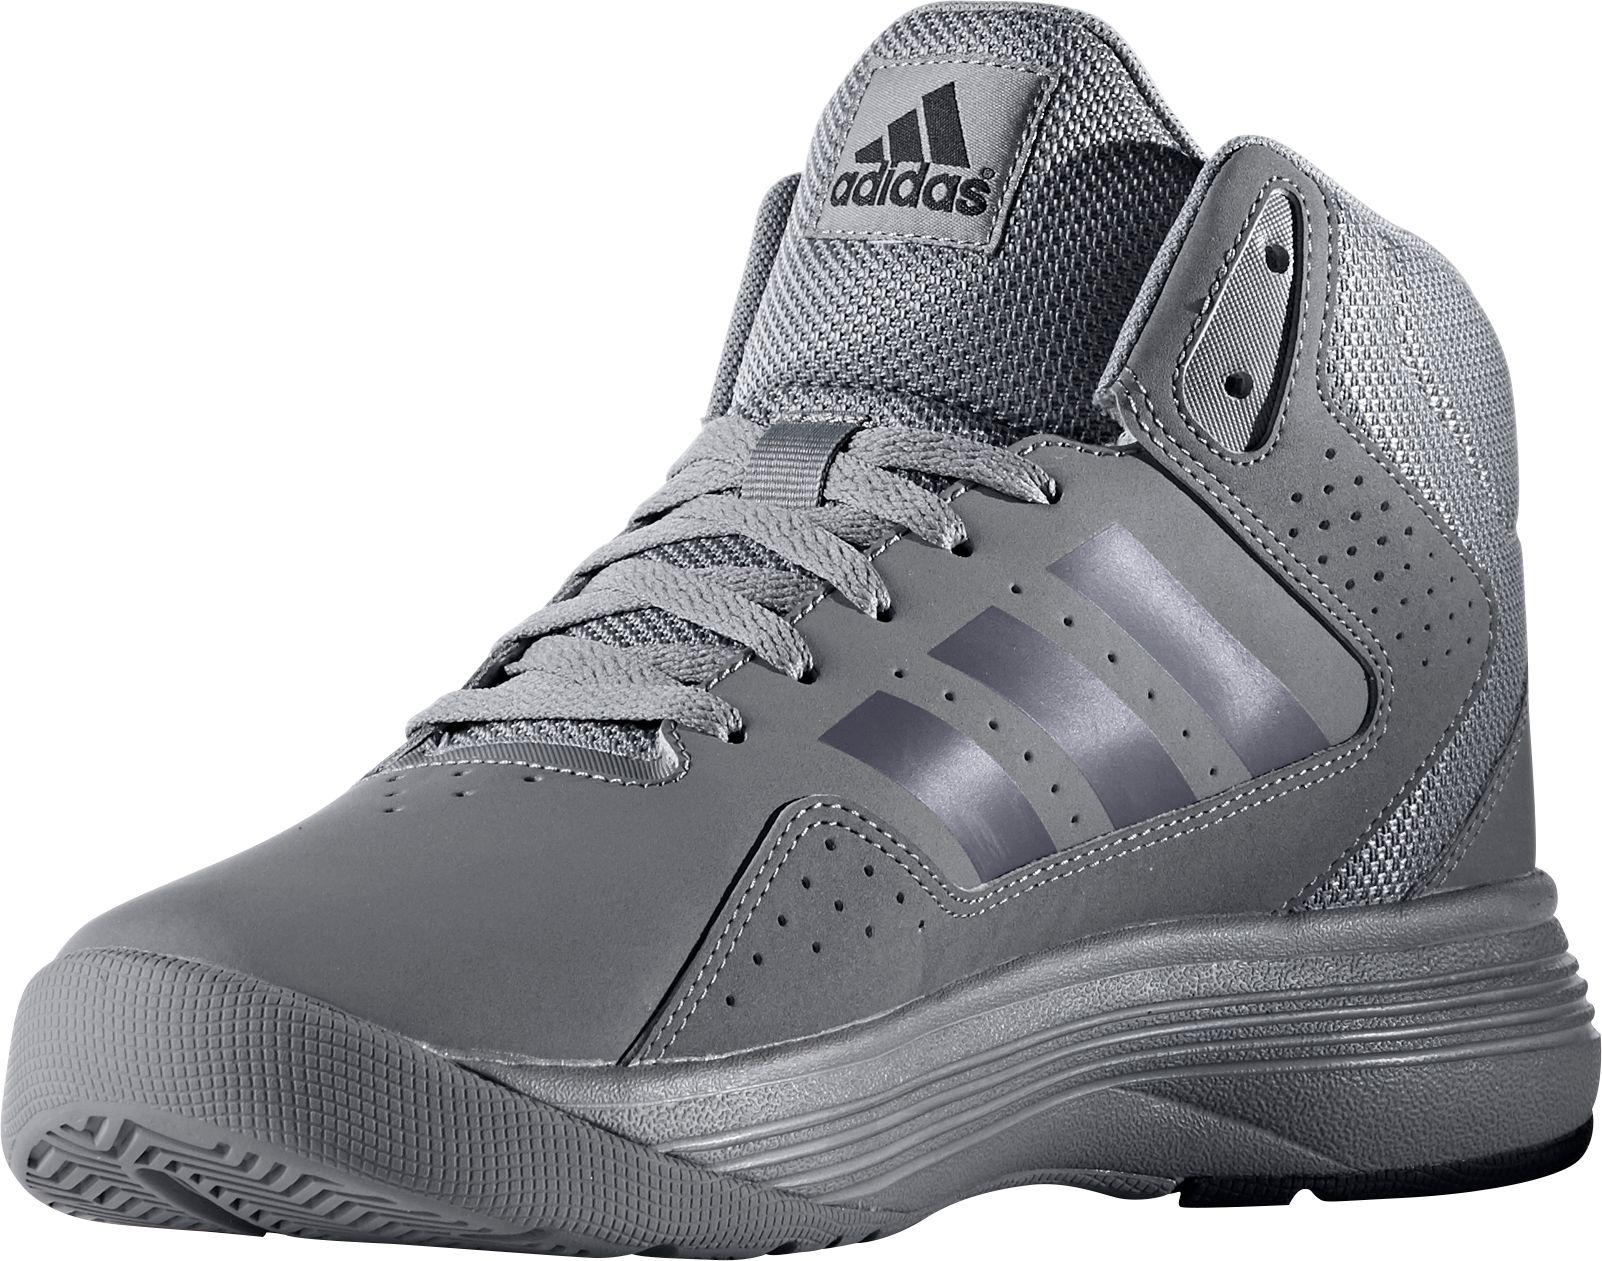 adidas Leather Neo Cloudfoam Ilation Mid Basketball Shoes in Grey/Black  (Gray) for Men - Lyst